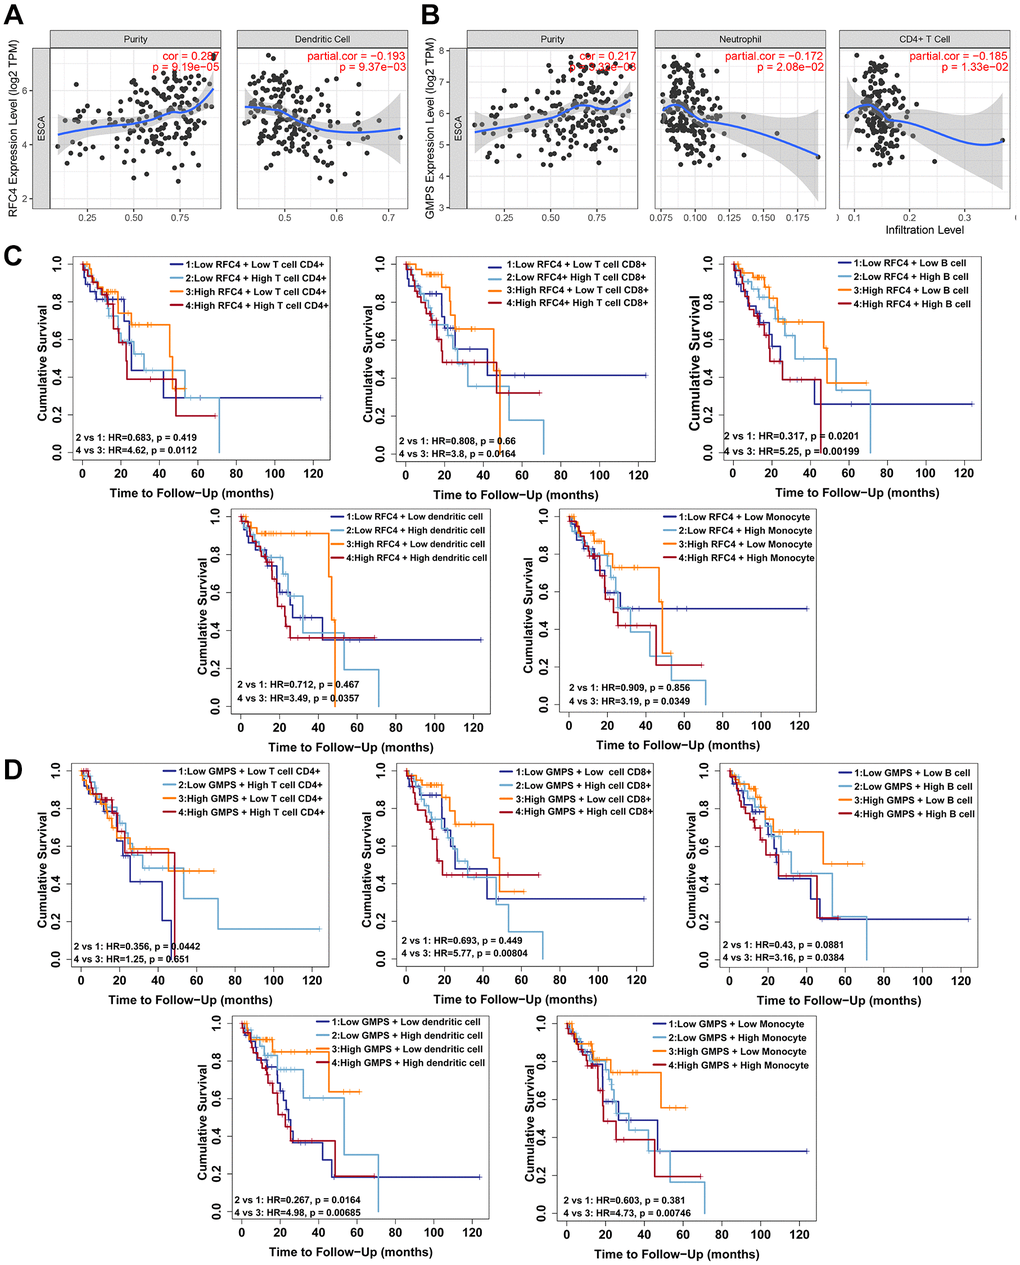 RFC4 and GMPS expression correlates with tumor-infiltrating immune cells and immune escape in esophageal carcinoma. (A) RFC4 expression was positively correlated with the tumor purity (r = 0.287, p p B) GMPS expression was positively correlated with the tumor purity (r = 0.217, p p p C) A high level of RFC4 accompanied by a high expression of CD4+ T cells (p = 0.0112), CD 8+ T cells (p = 0.0164), B cells (p = 0.00199), dendritic cells (p = 0.0357) and monocytes (p = 0.0349) indicated a poor prognosis. When RFC4 was expressed at low levels, a high expression of B cells (p = 0.0201) was associated with a better prognosis. (D) A high level of GMPS accompanied by a high expression of CD 8+ T cells (p = 0.00804), B cells (p = 0.0384), dendritic cells (p = 0.00685) and monocytes (p = 0.00746) indicated a poor prognosis. When GMPS was expressed at low levels, a high expression of CD 8+ T cells (p = 0.0442) and dendritic cells (p = 0.0164) was associated with a better prognosis. p 